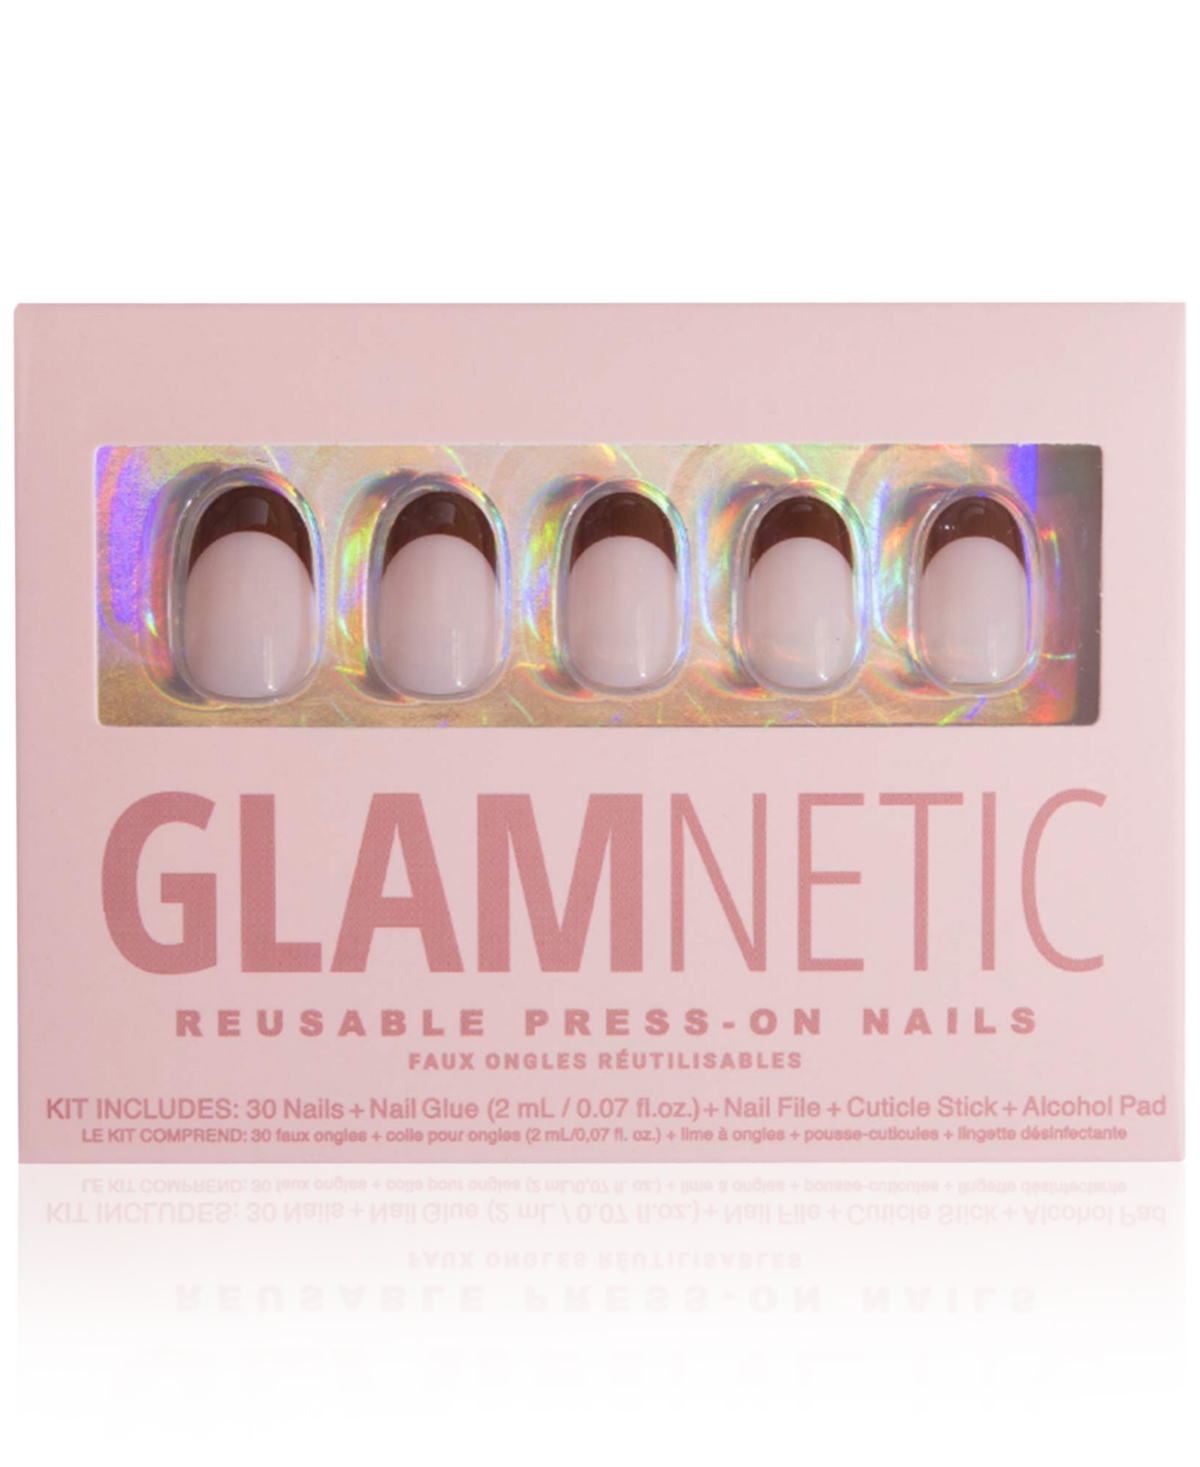 Glamnetic Press-on Nails - French Press In Brown